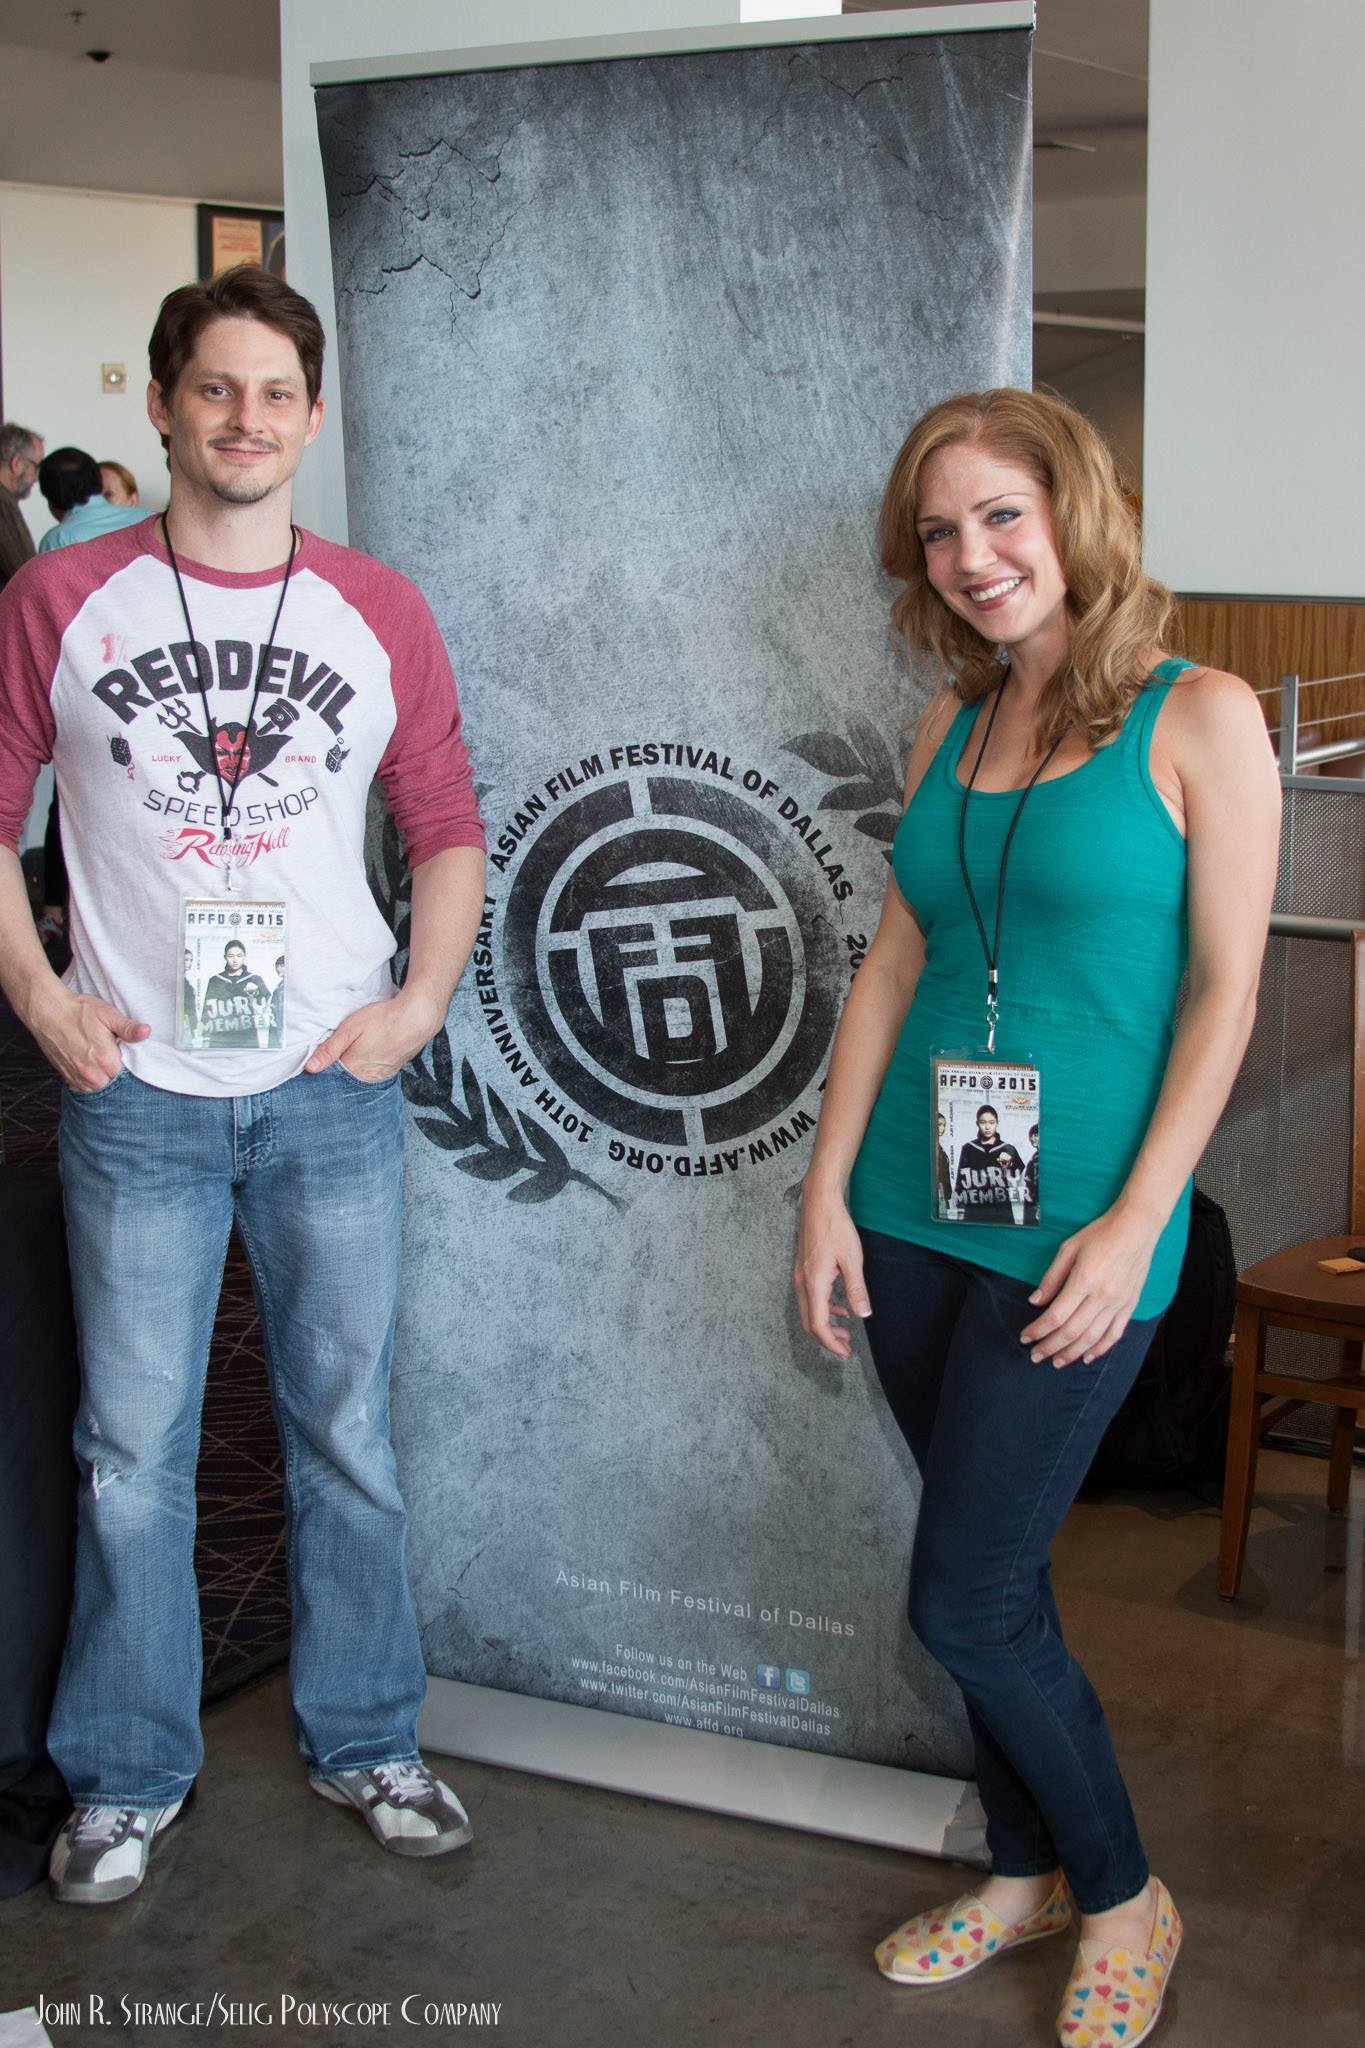 Stephen Brodie and Cassie Shea Watson at the 2015 Asian Film Festival of Dallas